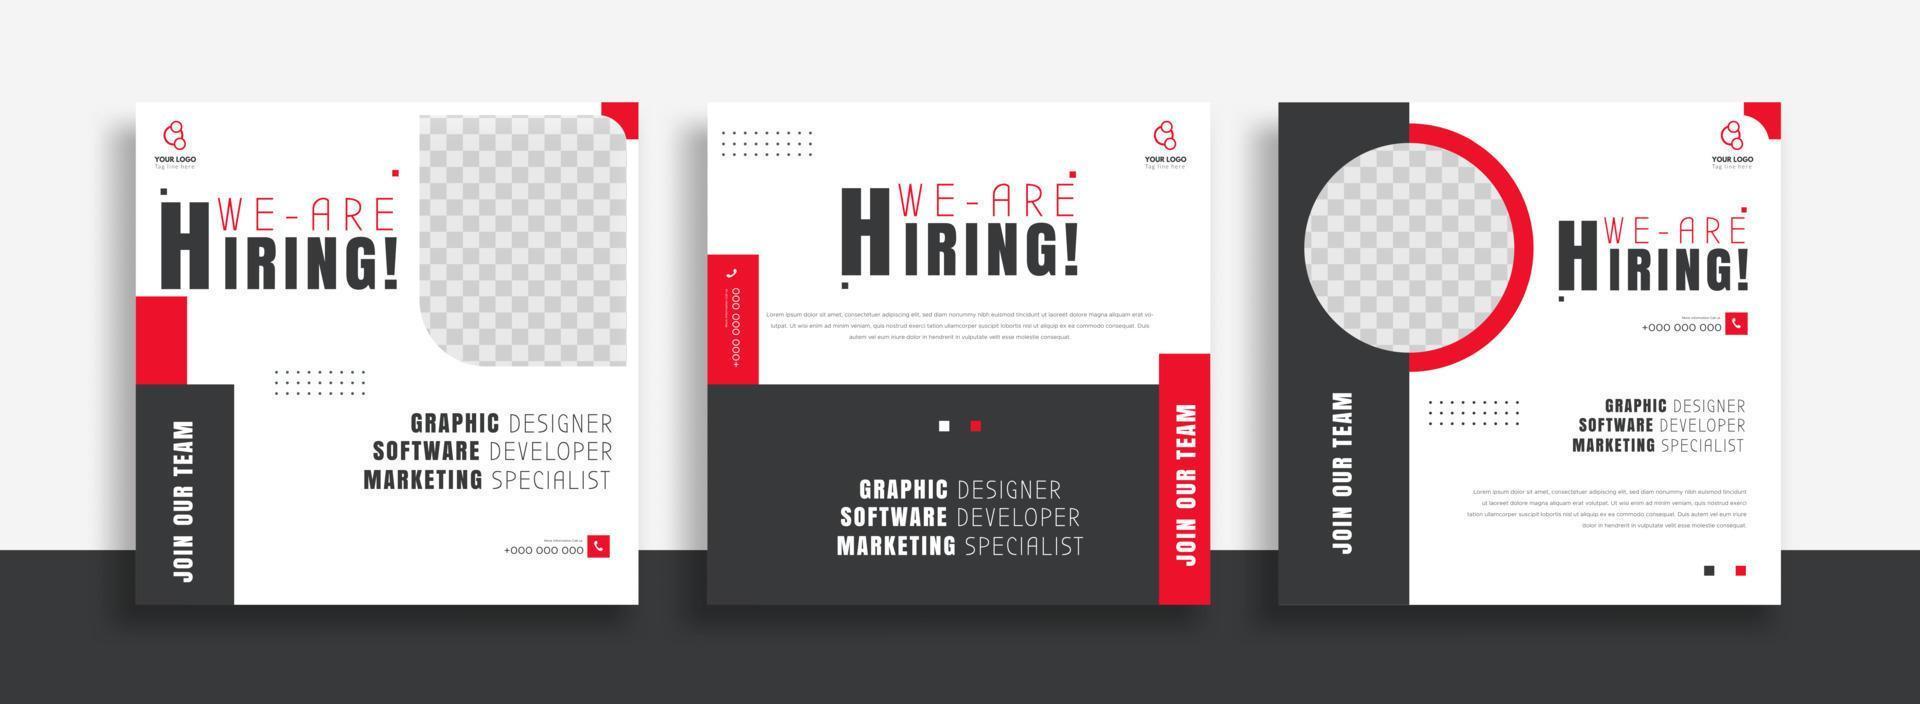 We are hiring job vacancy social media post banner design template with red and white color. We are hiring job vacancy square web banner design. vector